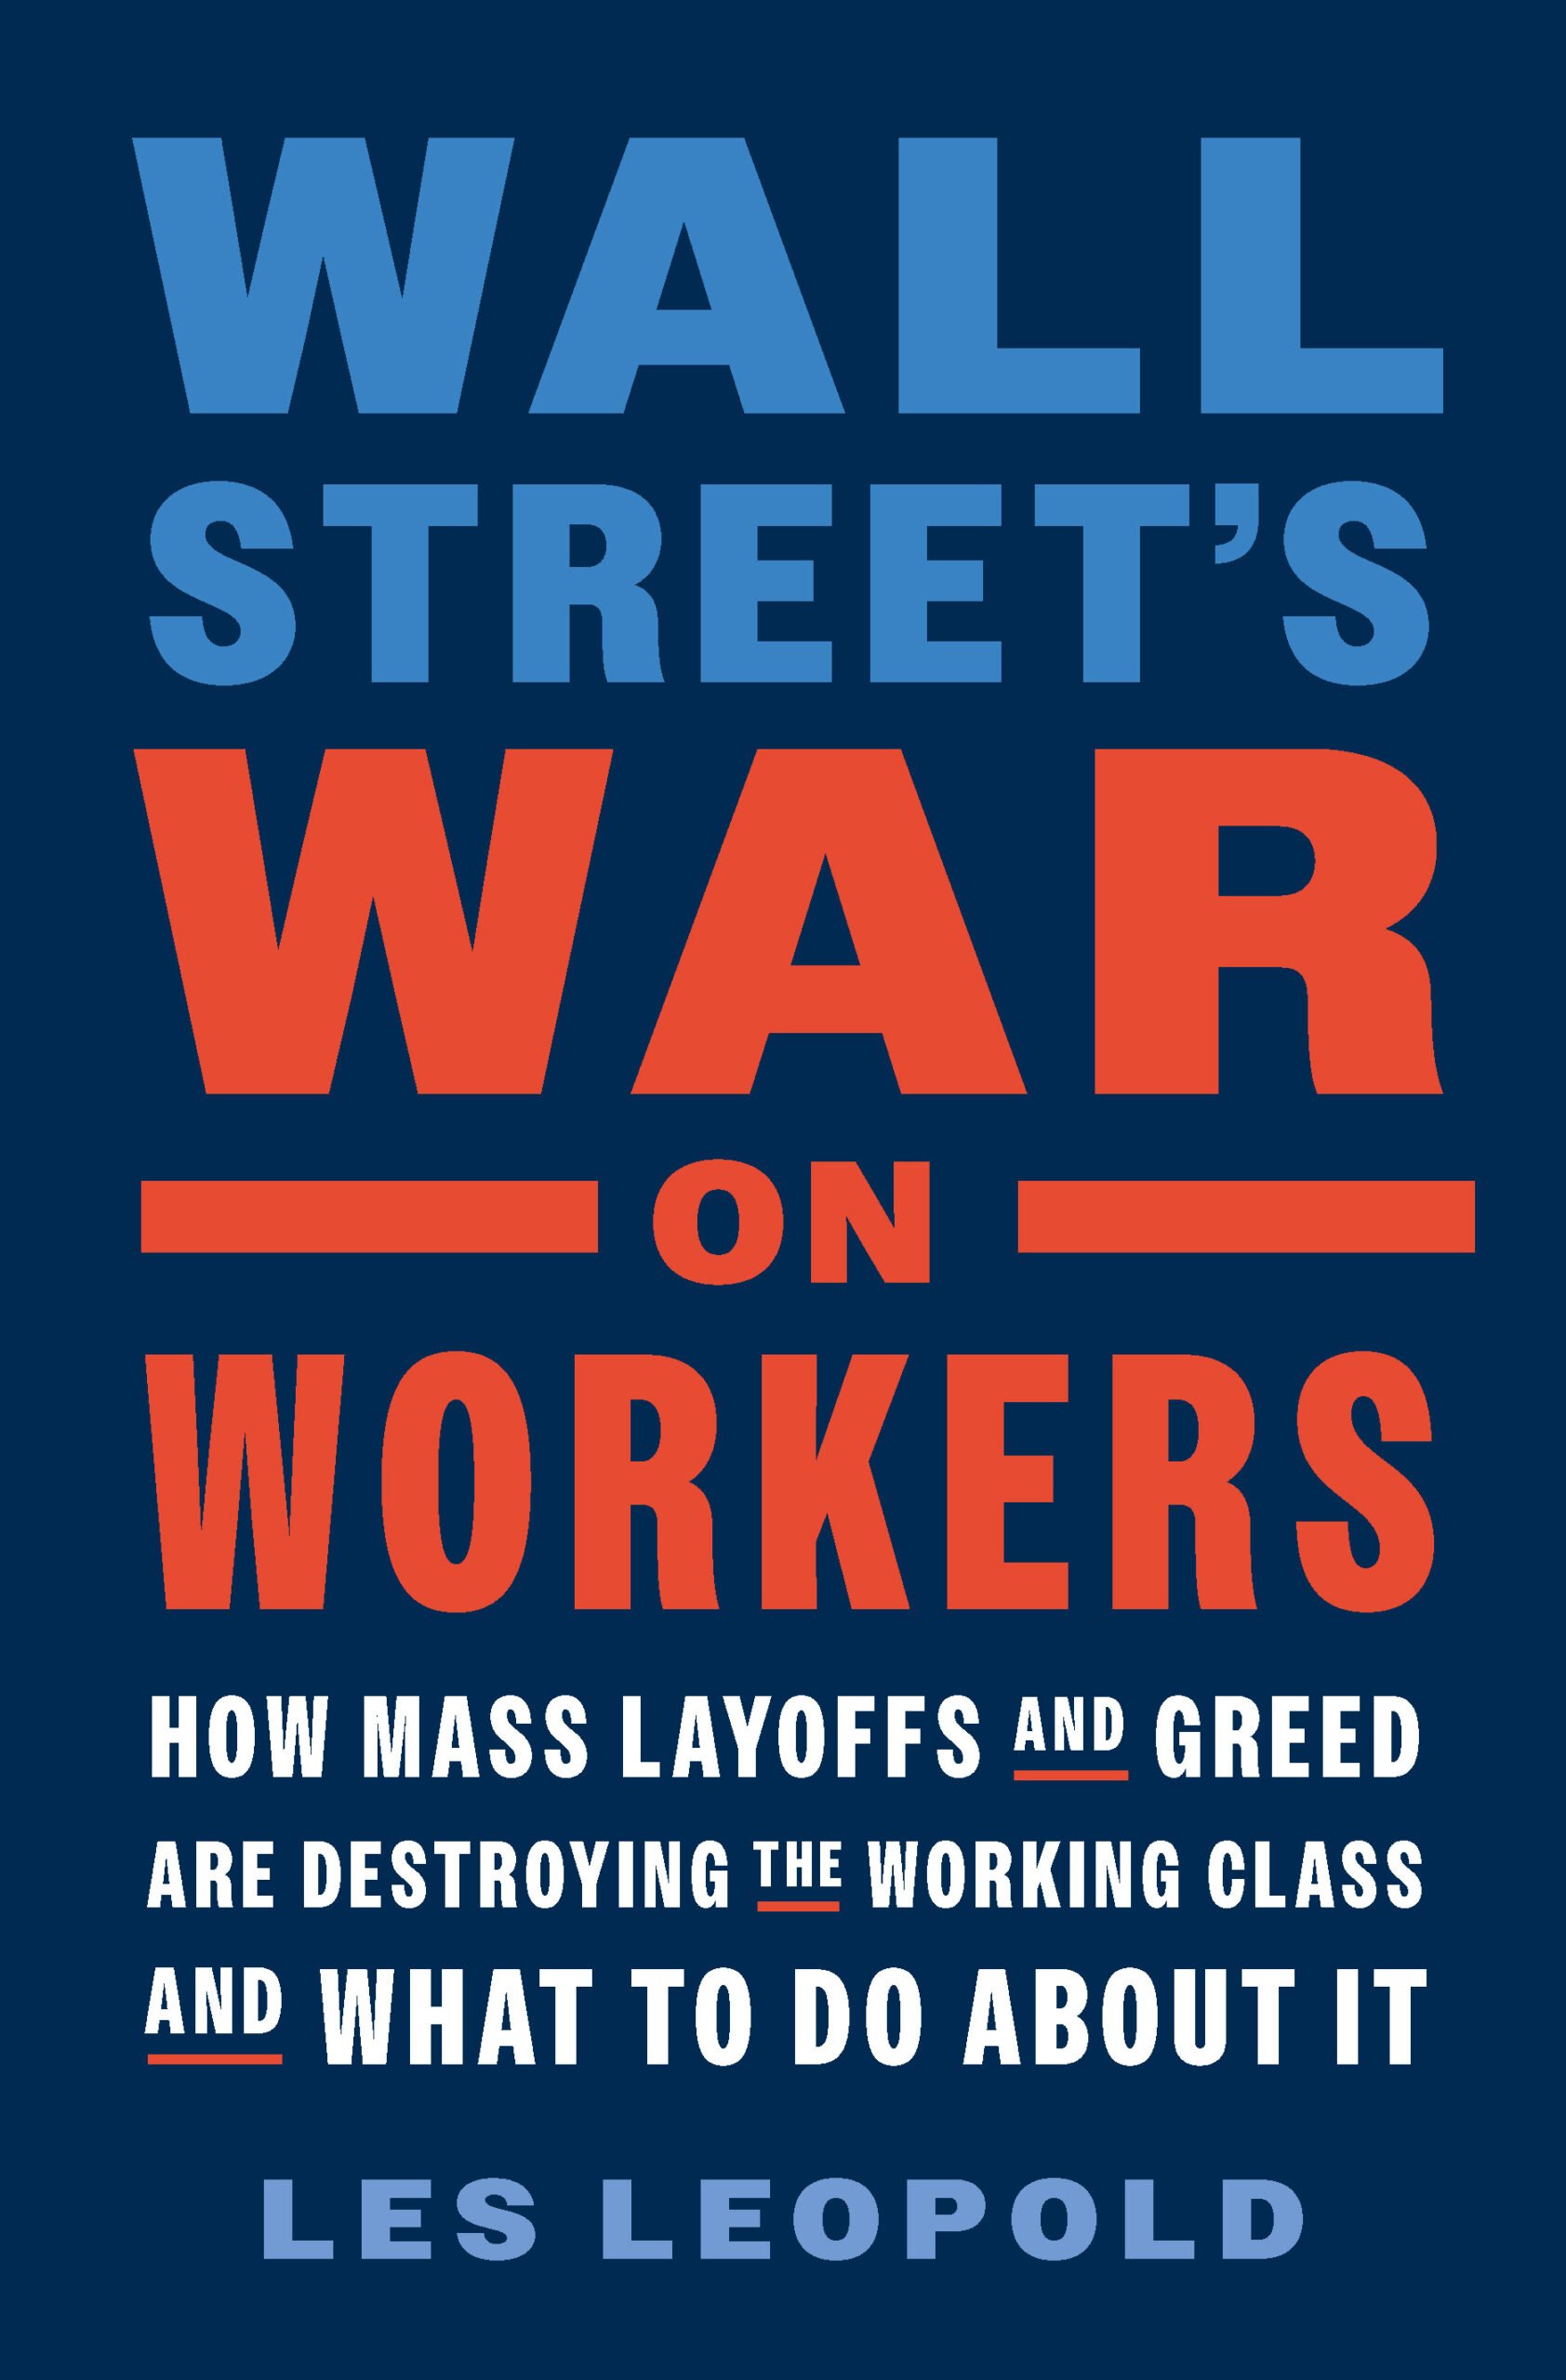 The Wall Street's War on Workers cover